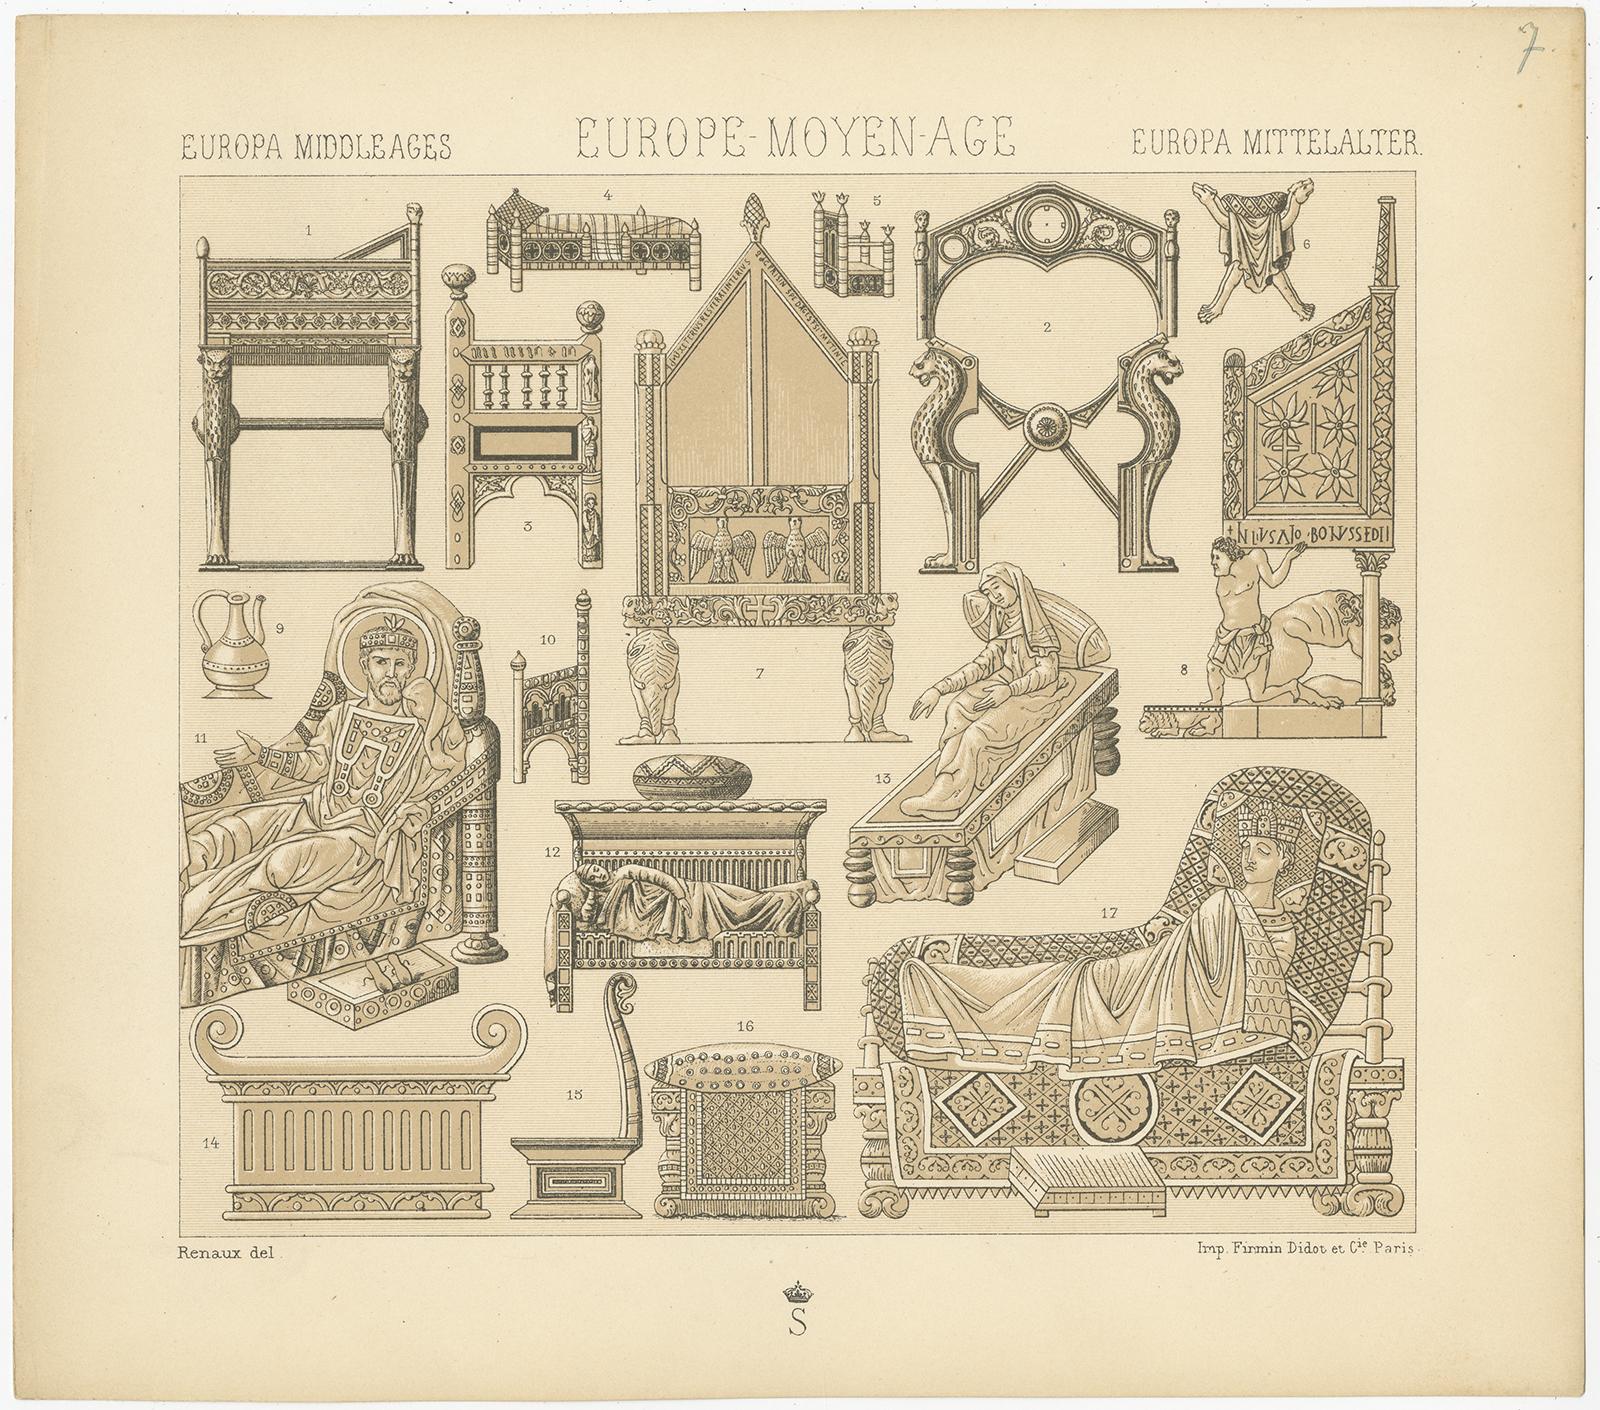 Antique print titled 'Europa Middle Ages - Europe Moyen Age - Europa Mittelalter'. Chromolithograph of European Middle Ages Statue Objects. This print originates from 'Le Costume Historique' by M.A. Racinet. Published circa 1880.